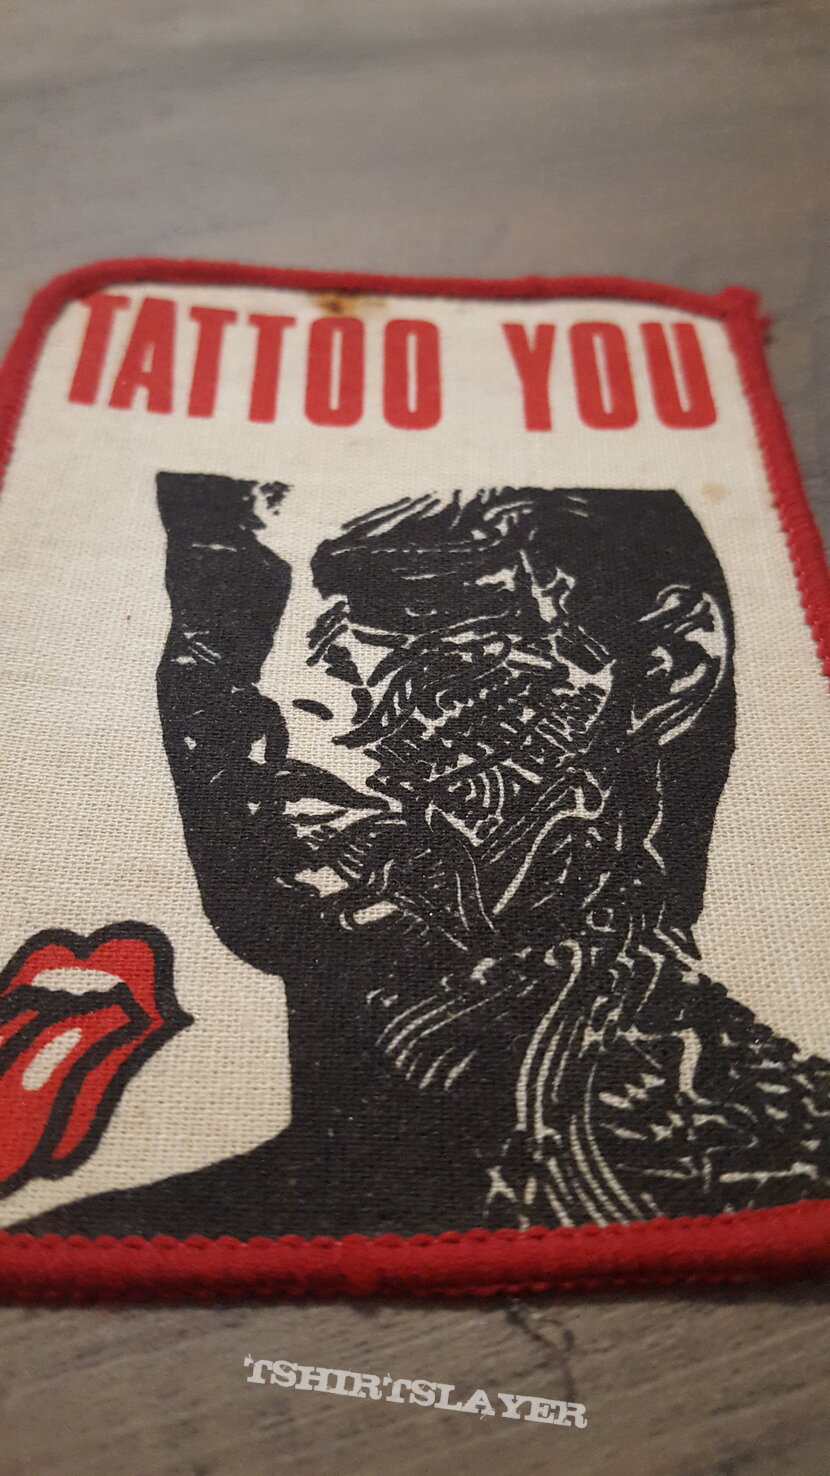 Rolling Stones Rolling Stone Tattoo you patch